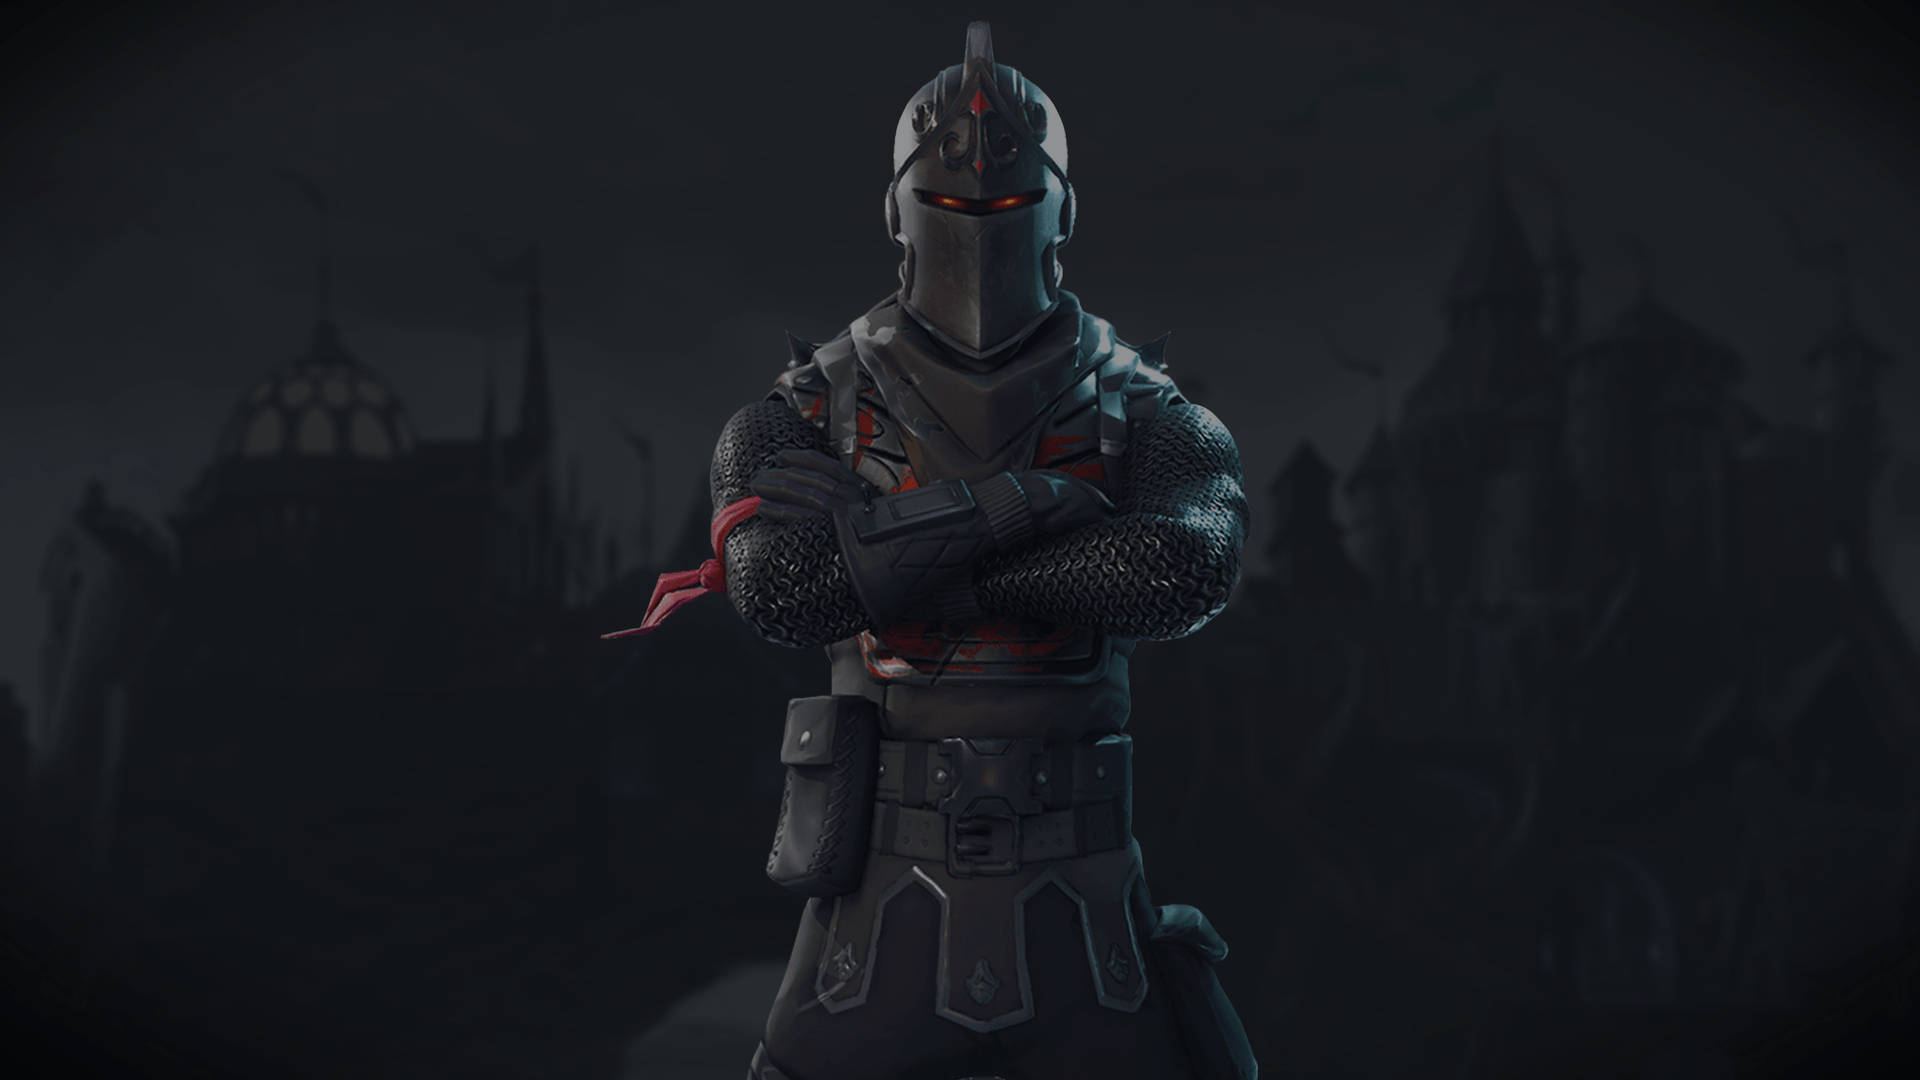 Strike fear in the heart of your enemies with the Black Knight! Wallpaper